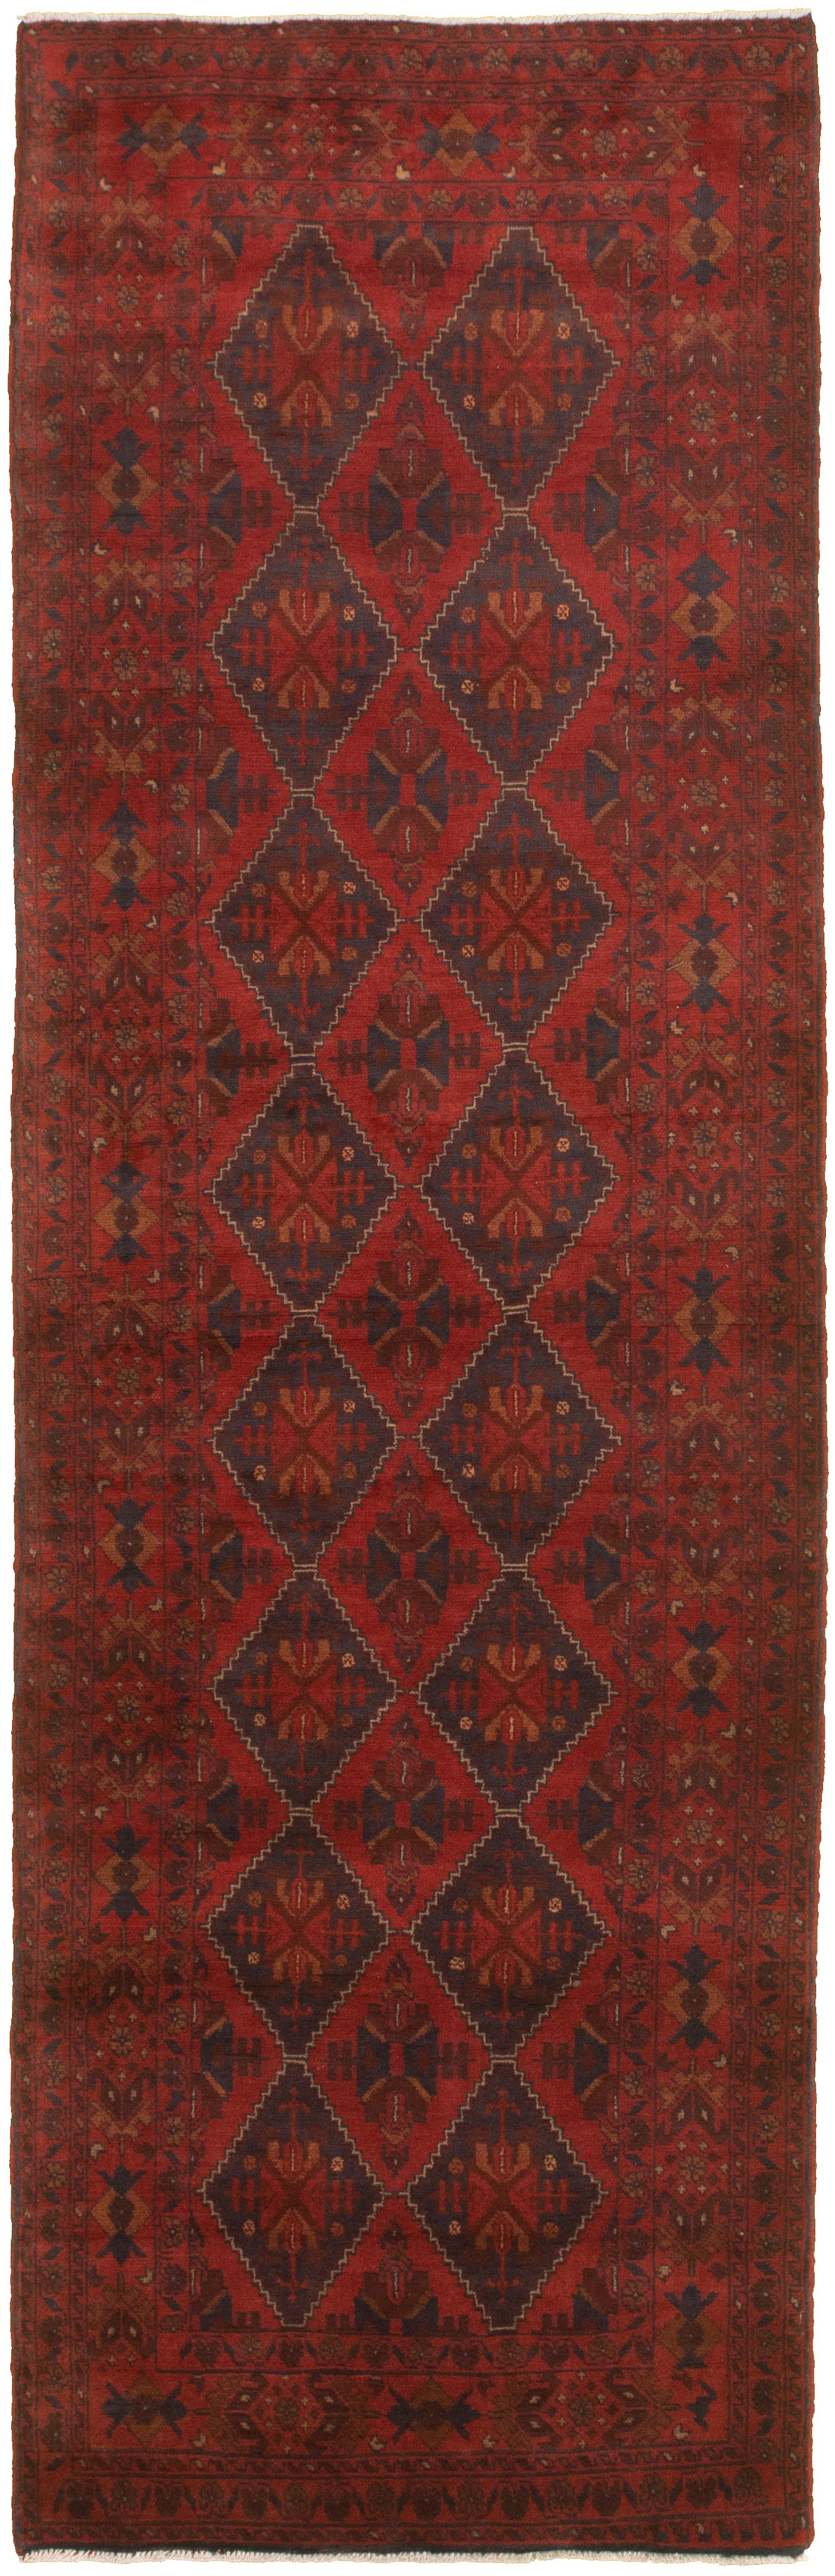 Hand-knotted Finest Khal Mohammadi Red  Rug 2'11" x 9'6" Size: 2'11" x 9'6"  